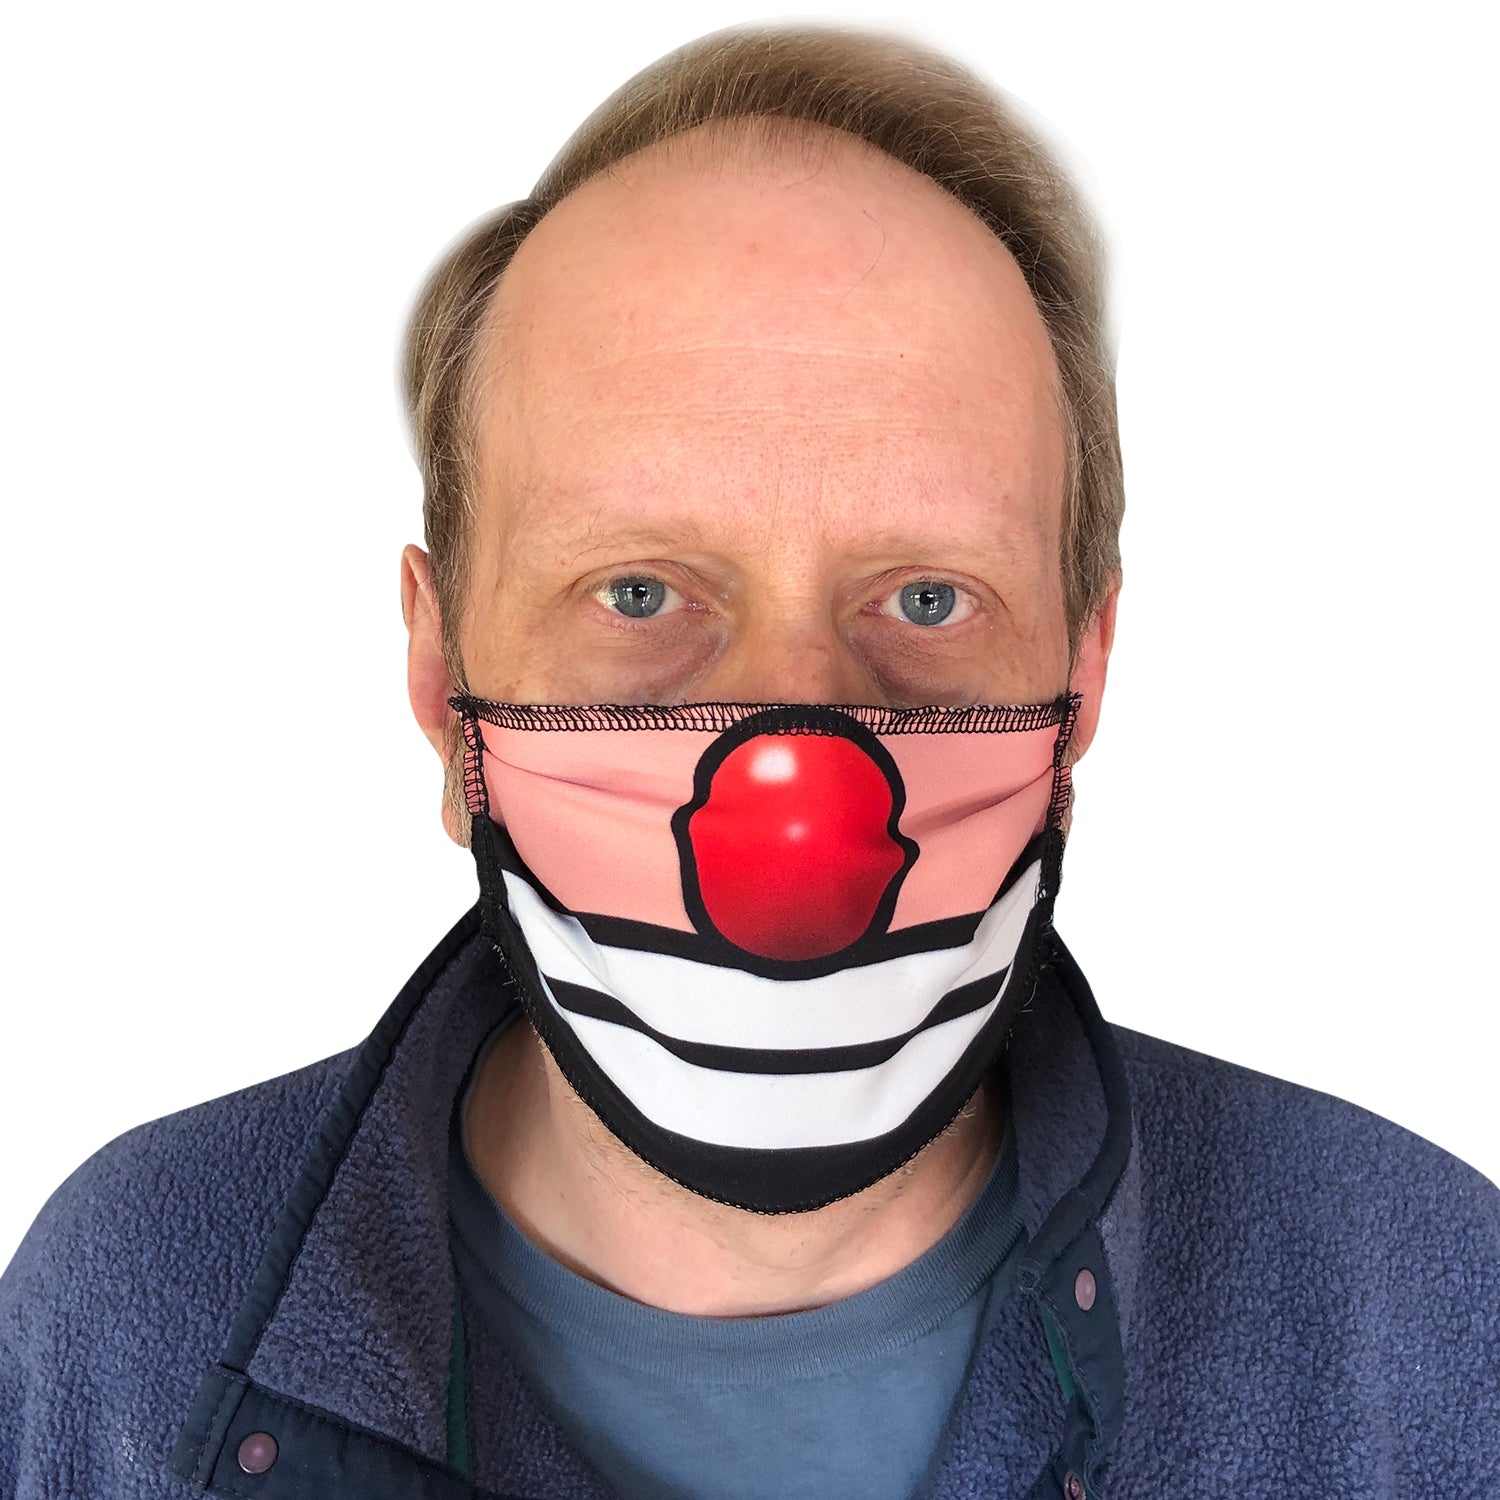 Clown Mask Covering - Hobo, 2-ply Reusable Face Mask